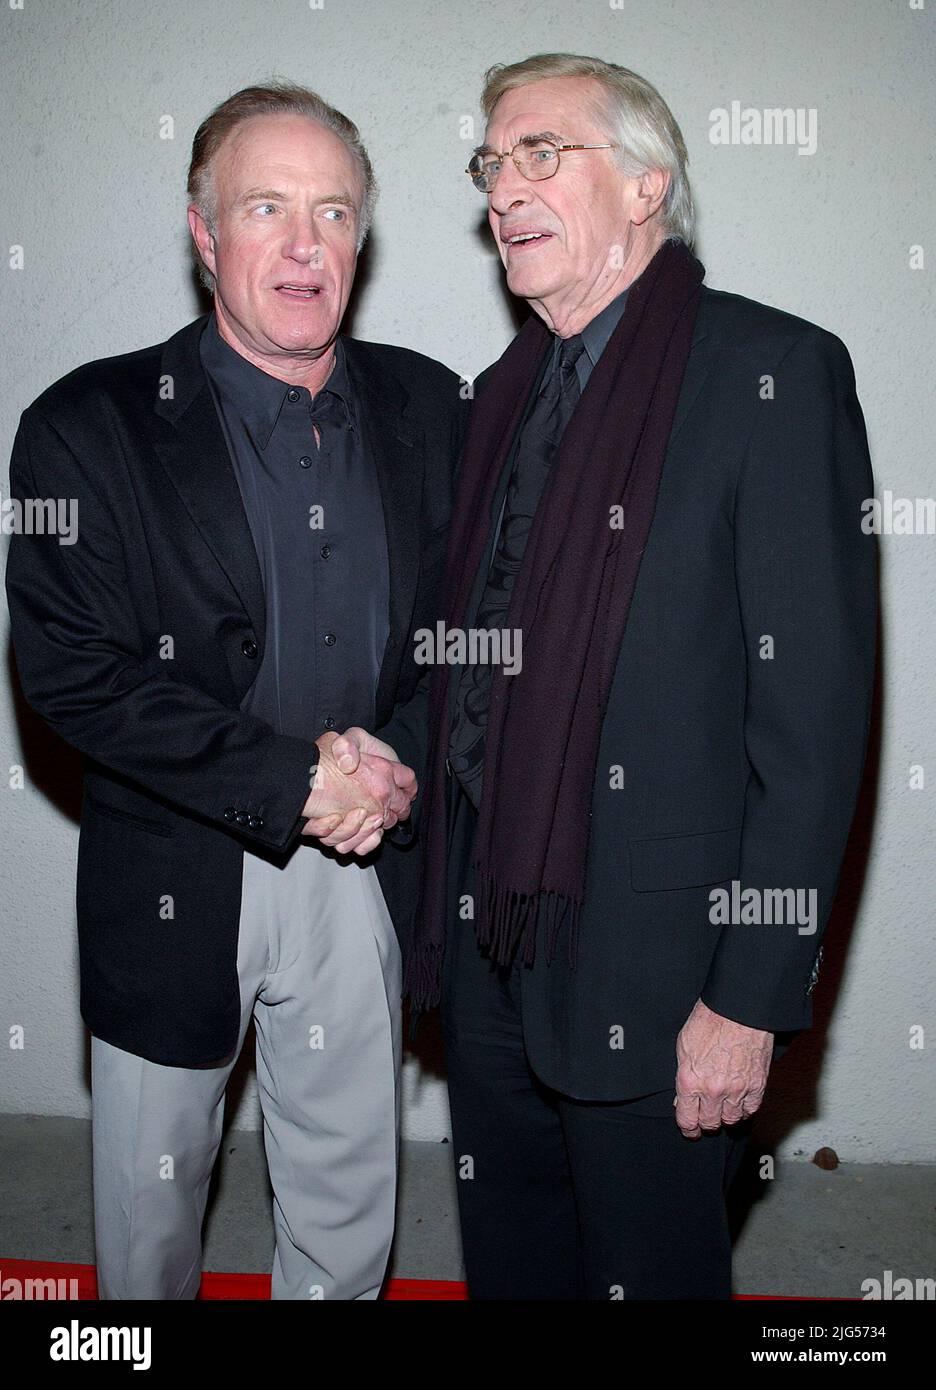 James Caan and Martin Landau arriving at the Norby's Walters 21th Annual Pre-Holiday Christmas Party at the Friars Club in Los Angeles. November 24, 2002.           -            CaanJames LandauMartin62.JPGCaanJames LandauMartin62 Event in Hollywood Life - California, Red Carpet Event, USA, Film Industry, Celebrities, Photography, Bestof, Arts Culture and Entertainment, Topix Celebrities fashion, Best of, Hollywood Life, Event in Hollywood Life - California, Red Carpet and backstage, , Music celebrities, Musician, Music Group, Topix, Bestof, Arts Culture and Entertainment, Photography,   Peopl Stock Photo